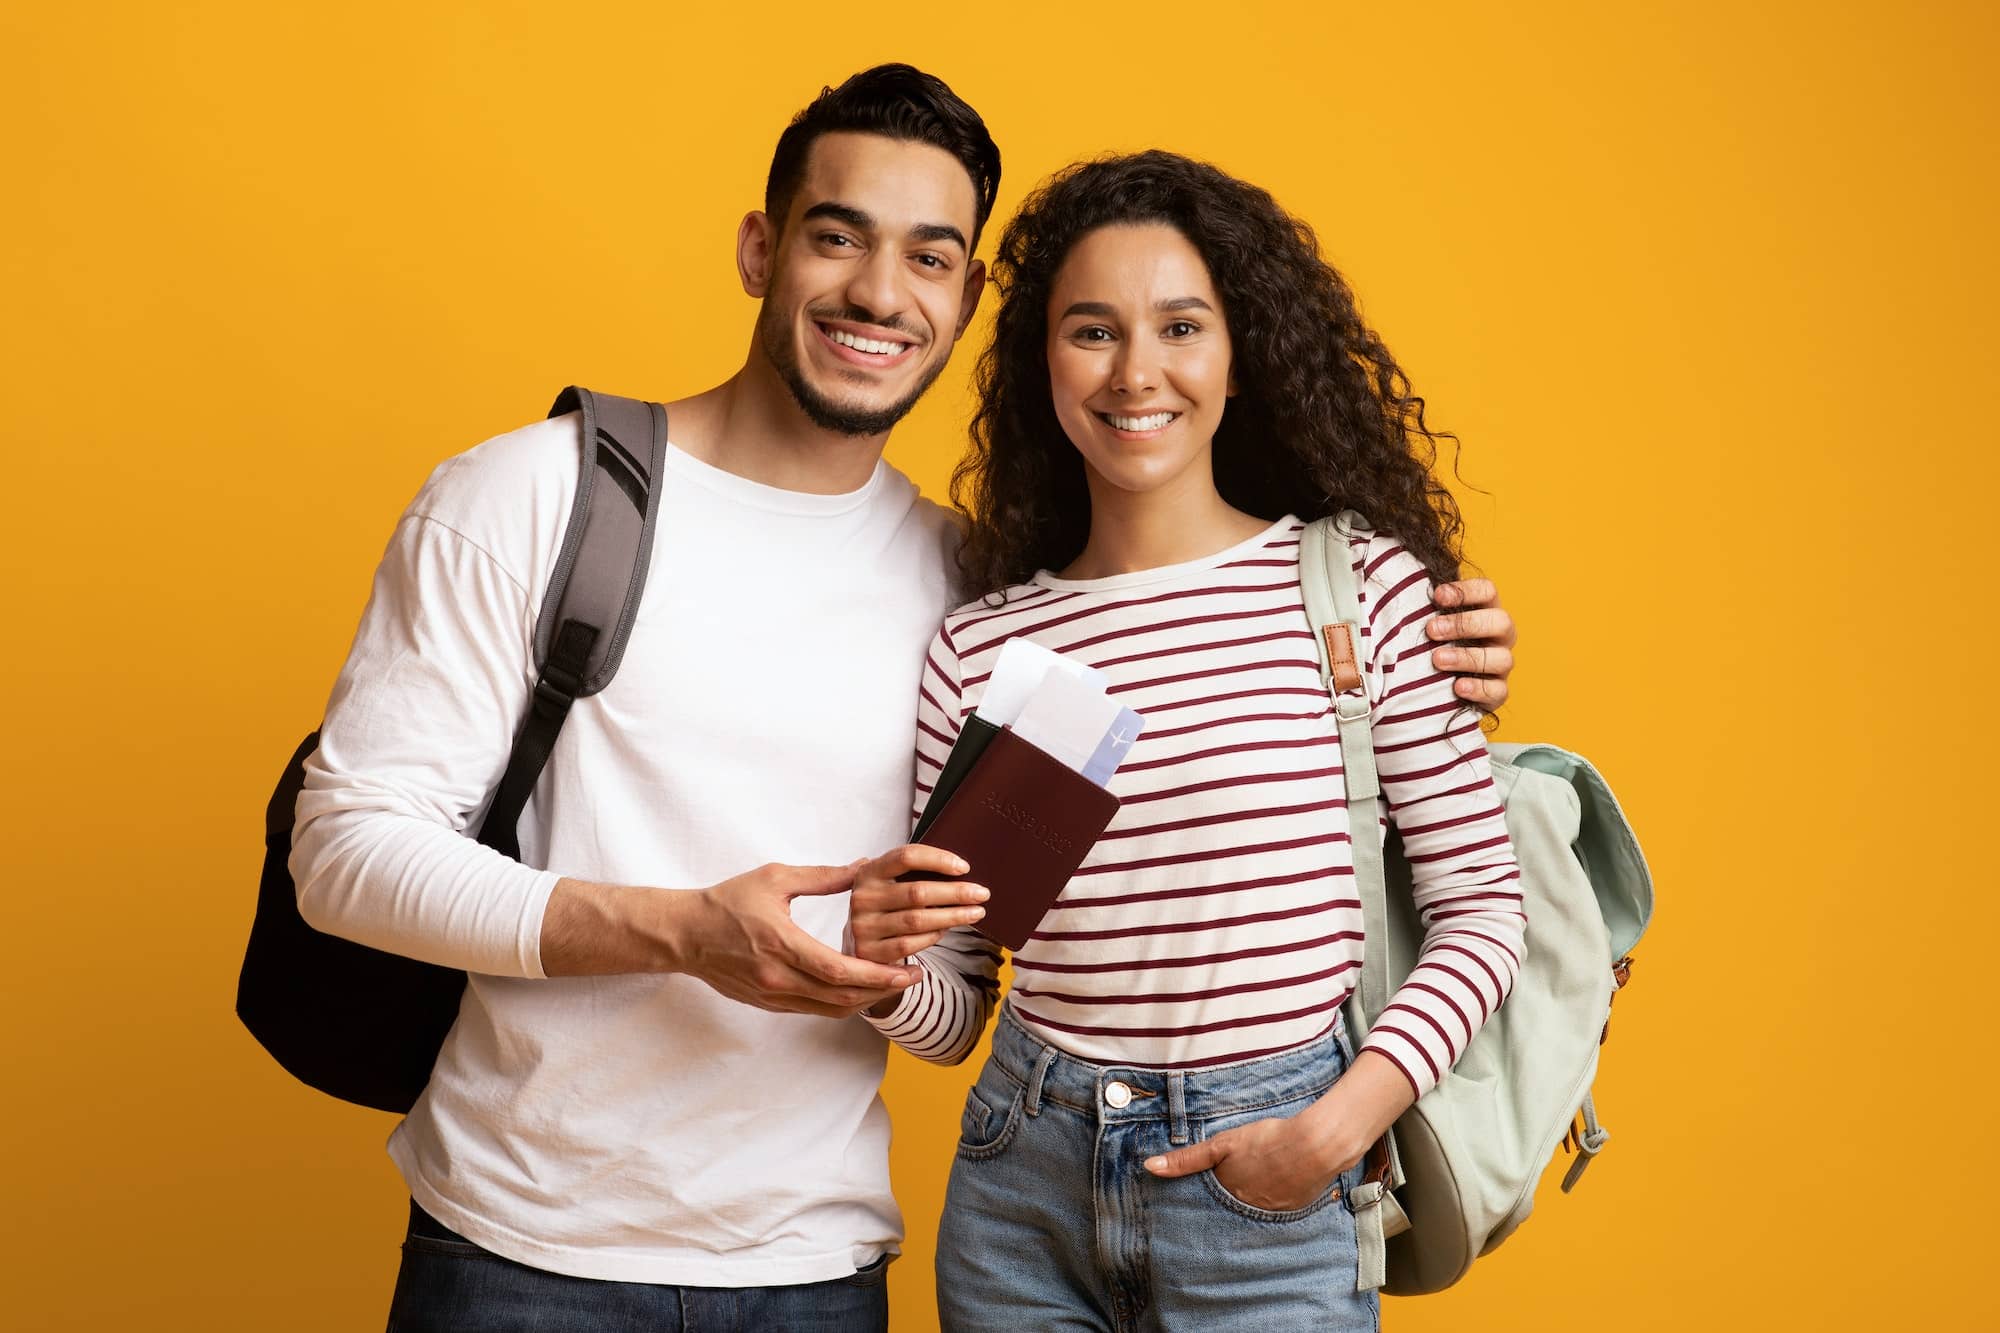 Happy Travellers. Smiling Arab Couple With Backpacks, Passports And Travel Tickets